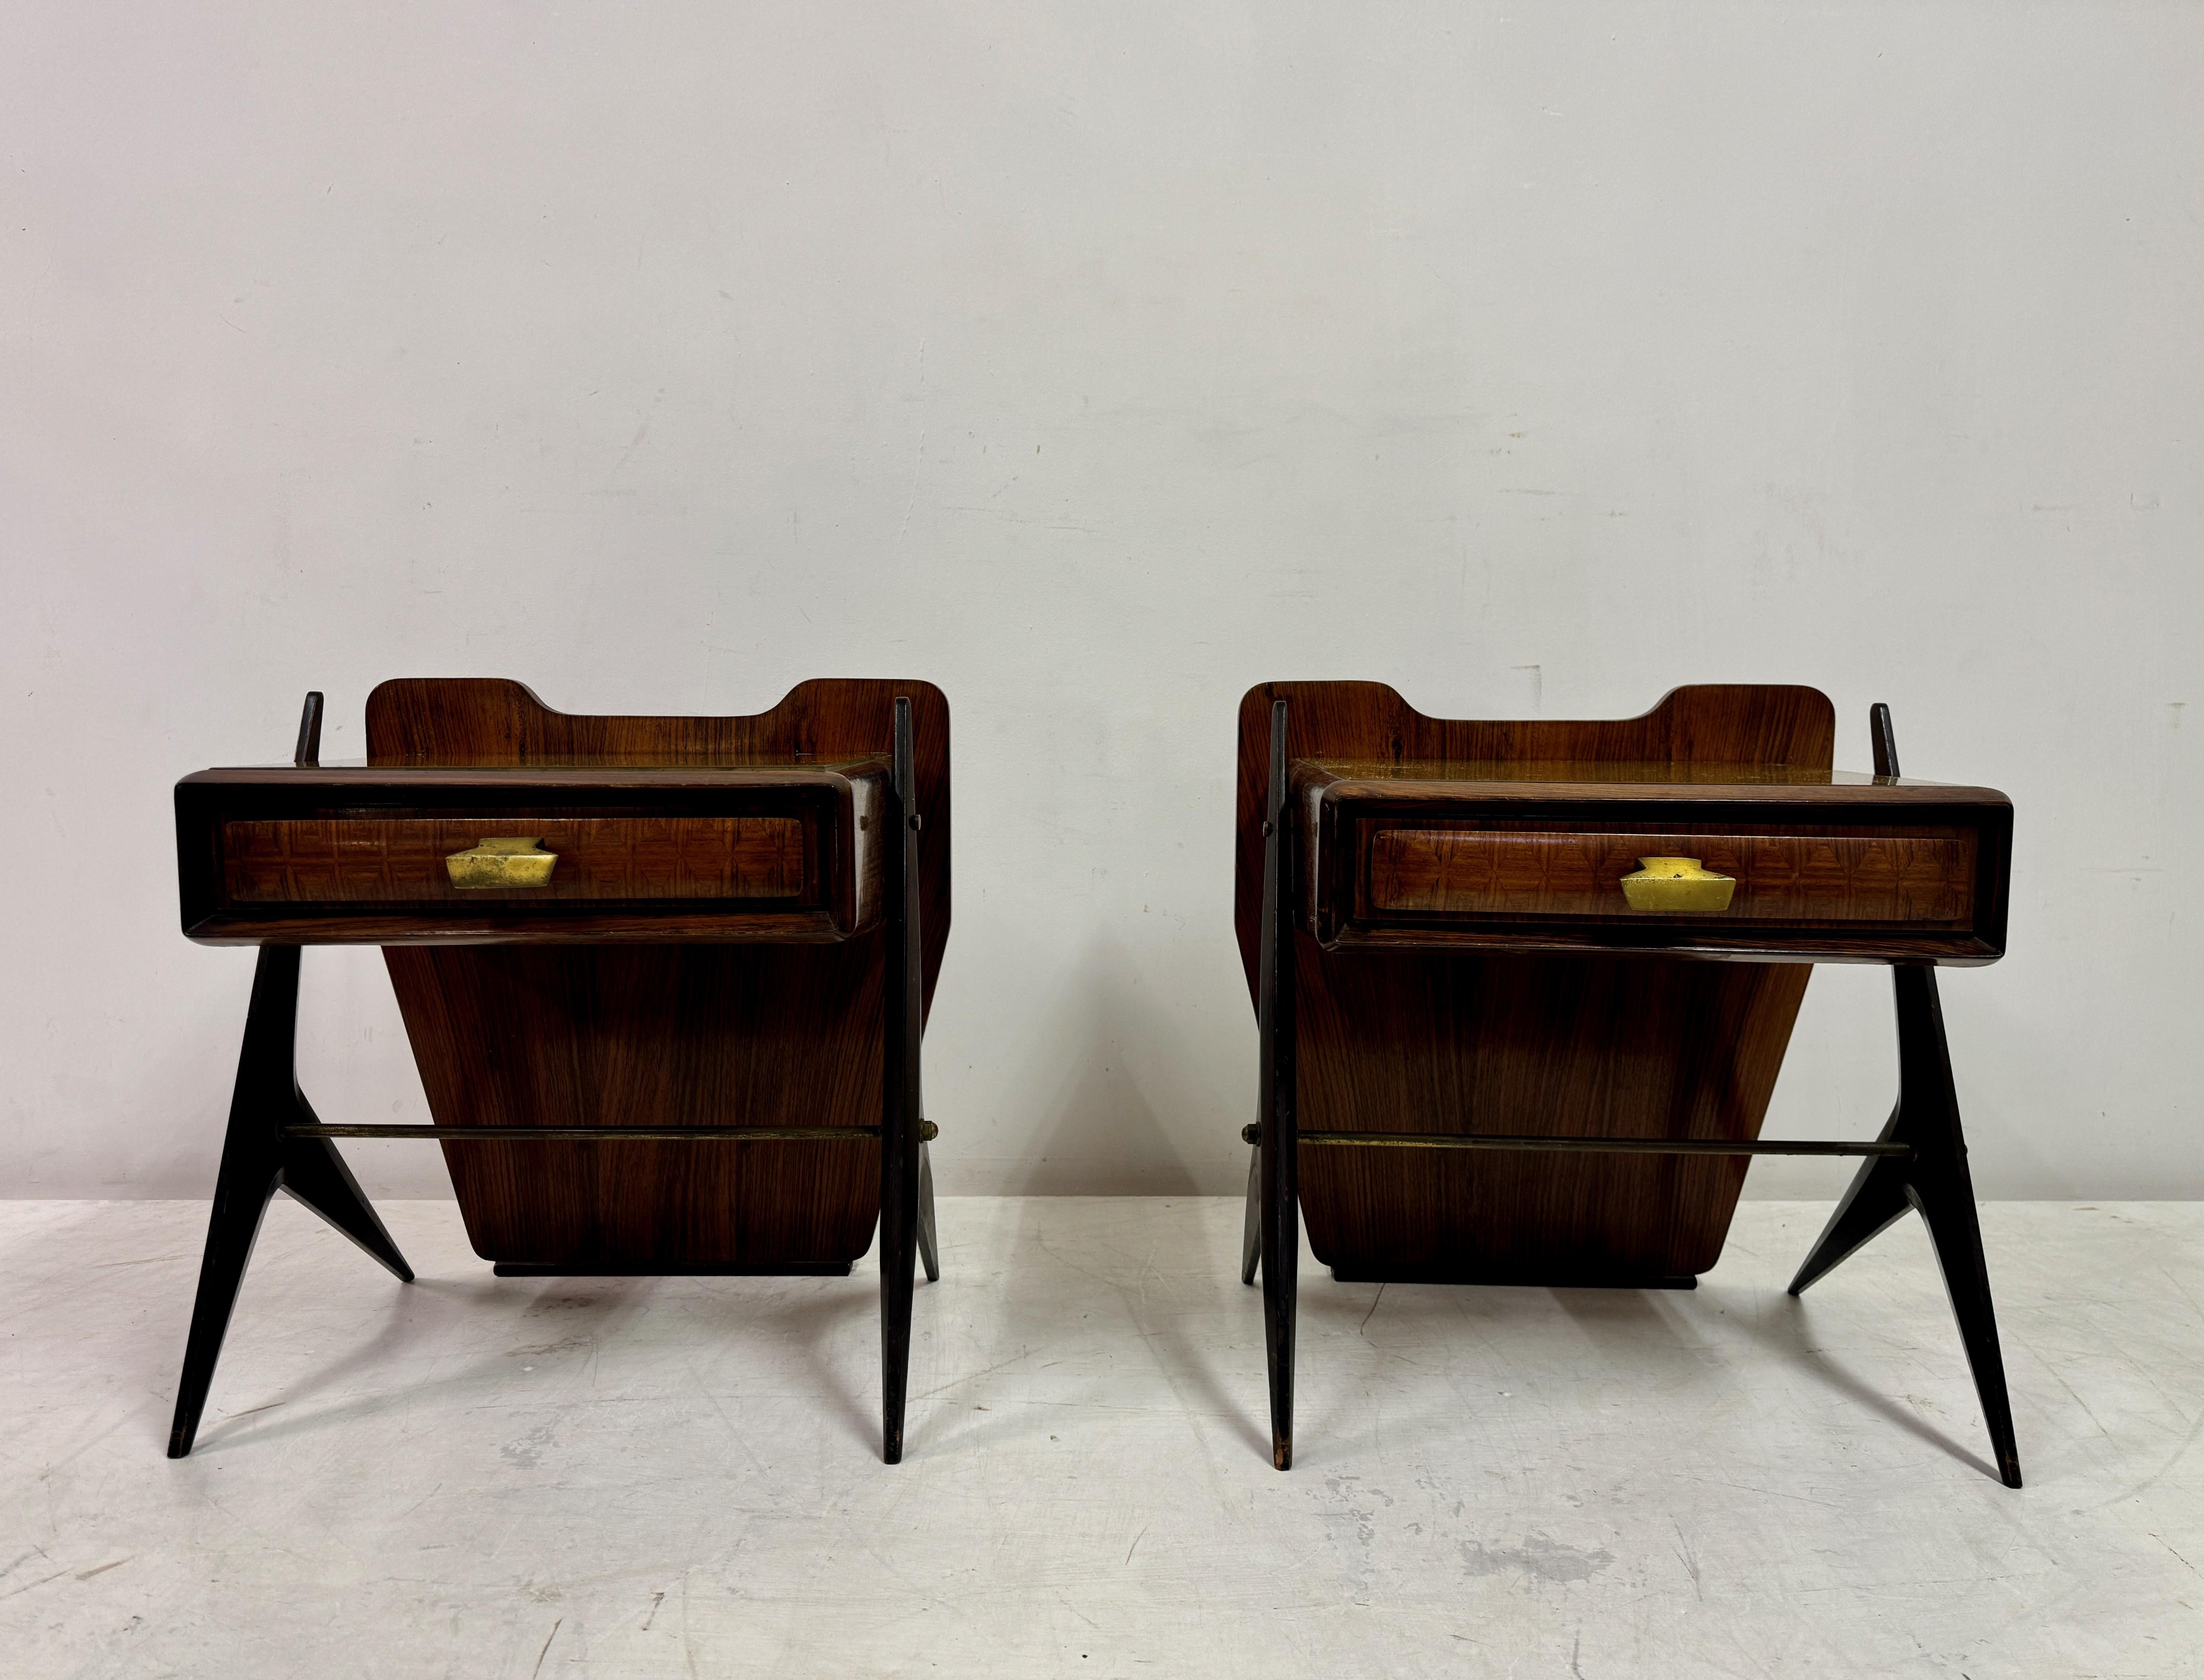 Pair of 1950s Italian Bedside Tables In Good Condition For Sale In London, London